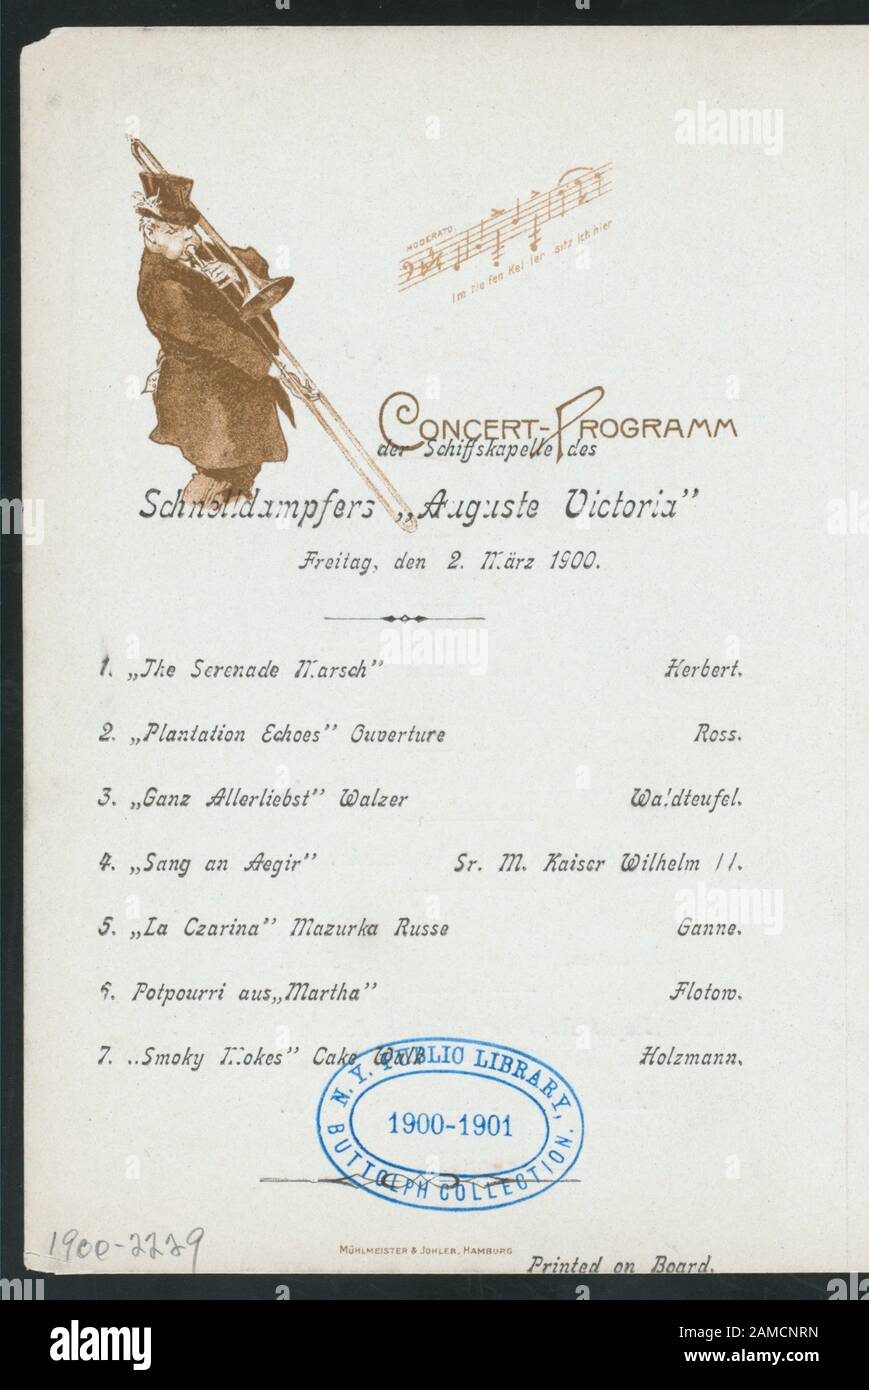 SUPPER (held by) HAMBURG-AMERIKA LINIE (at) SS AUGUSTE VICTORIA (SS;)  MENU LISTED IN GERMAN AND ENGLISH;MUSICIAN PLAYING TROMBONE;PICTURES OF JERUSALEM AND JAFFA;MUSICAL PROGRAM 1900-2229; SUPPER [held by] HAMBURG-AMERIKA LINIE [at] SS AUGUSTE VICTORIA (SS;) Stock Photo